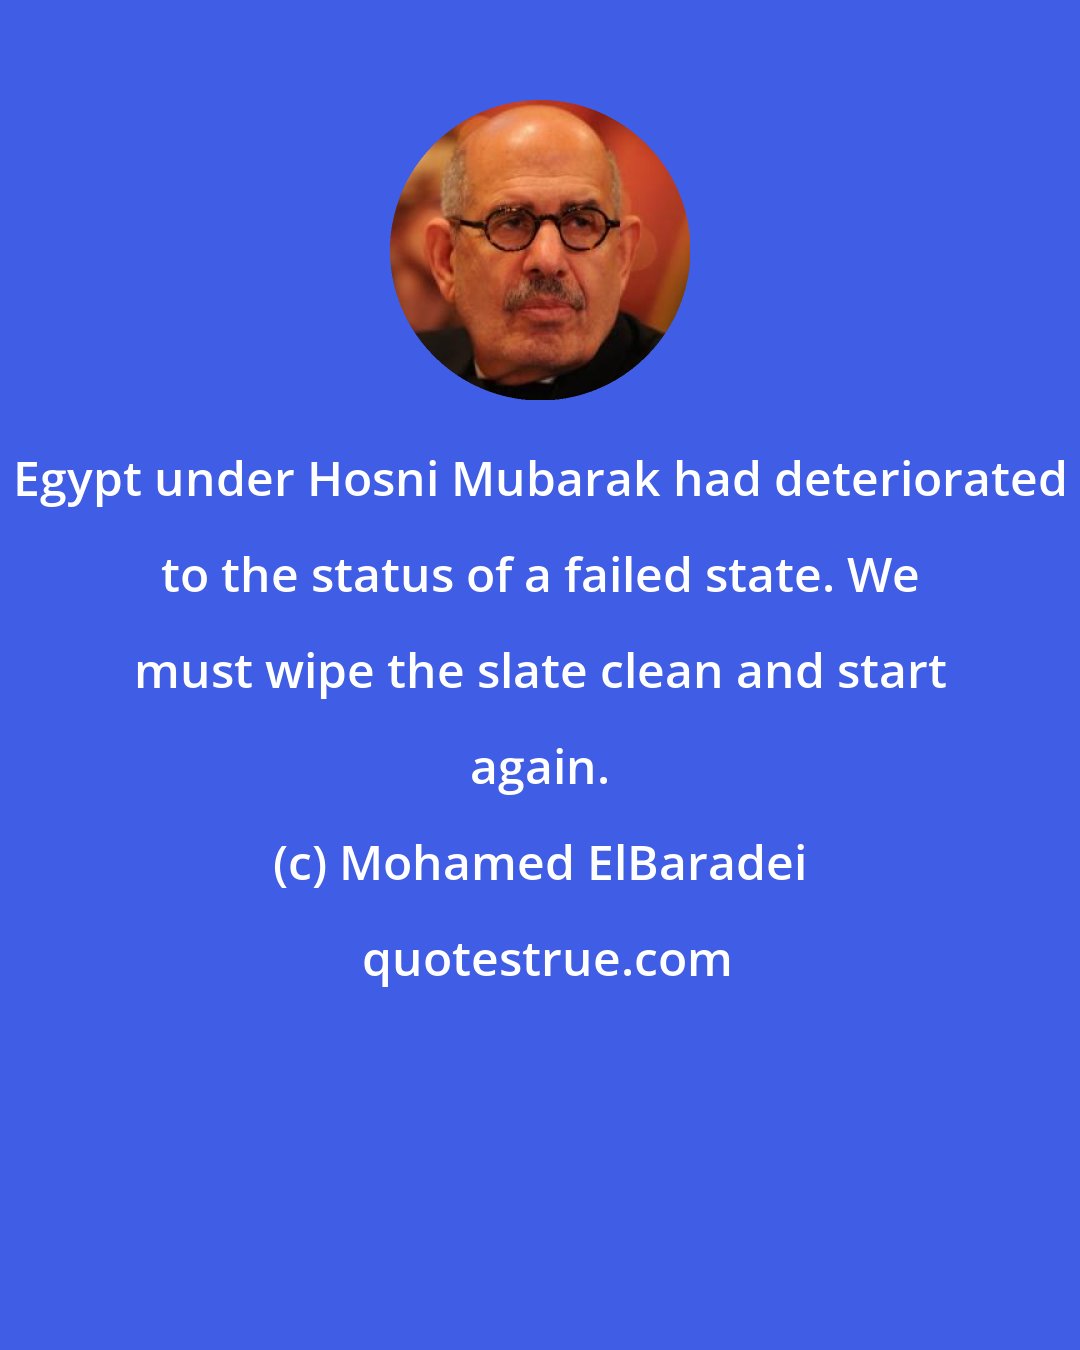 Mohamed ElBaradei: Egypt under Hosni Mubarak had deteriorated to the status of a failed state. We must wipe the slate clean and start again.